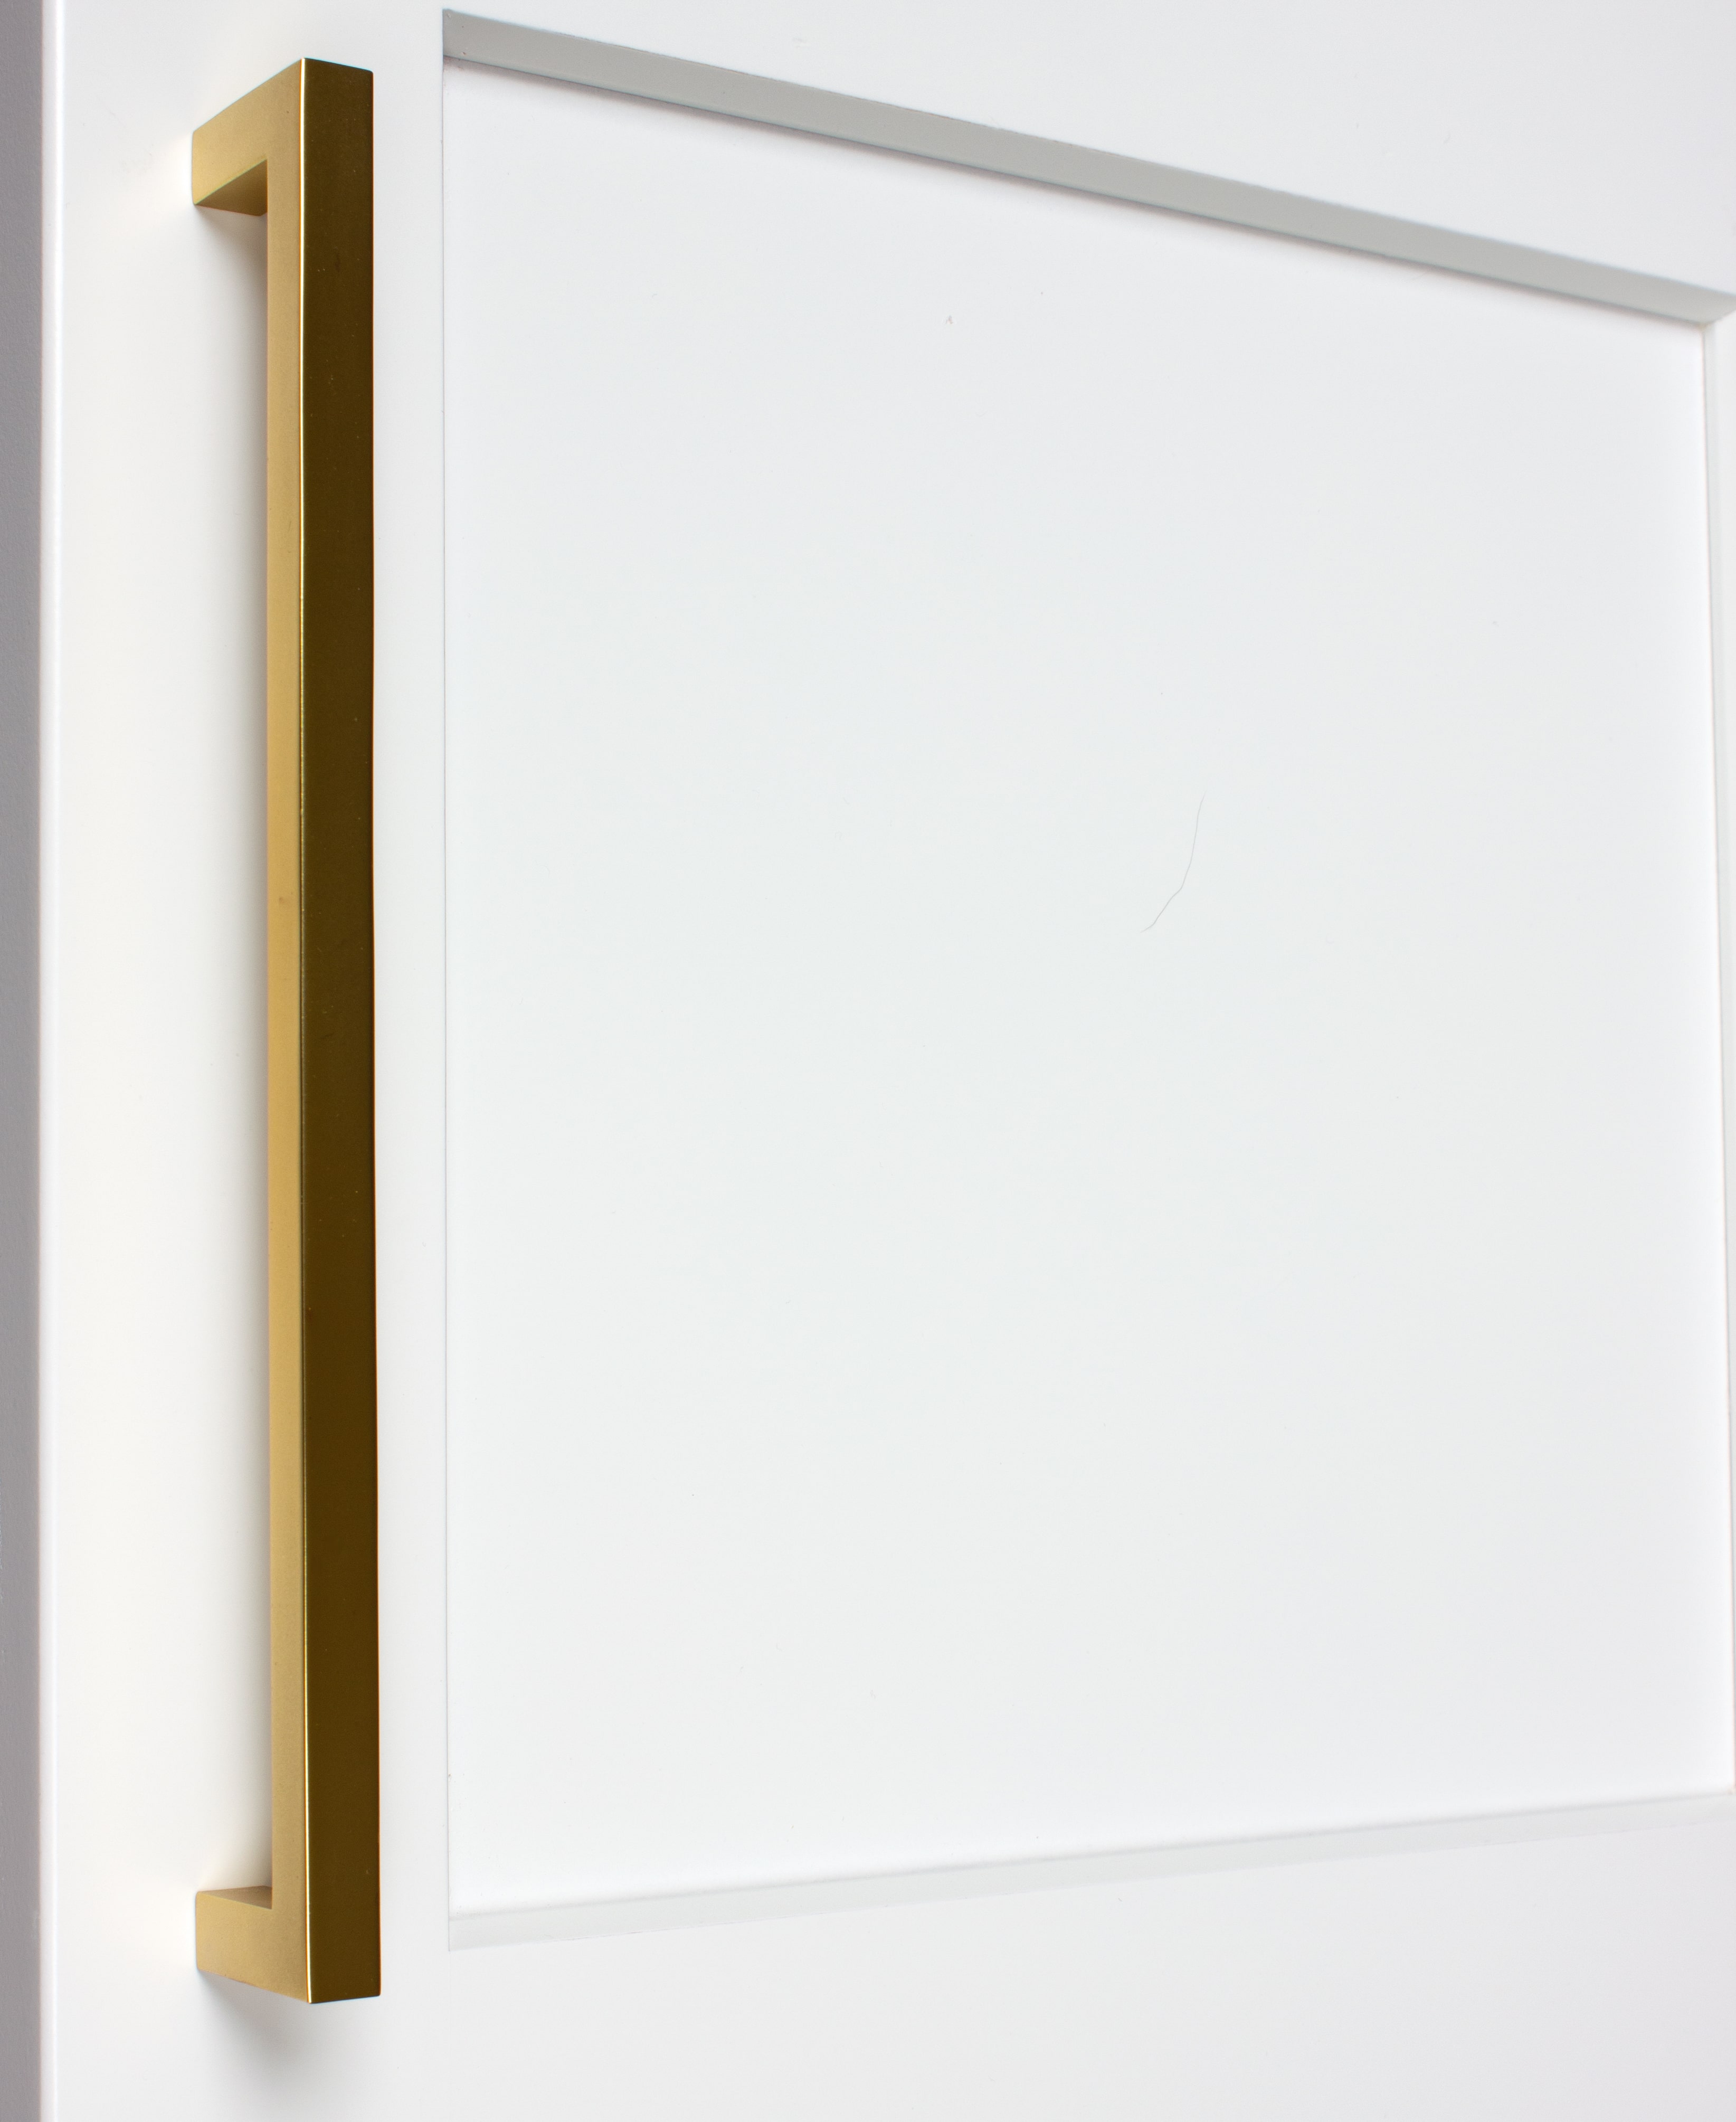 GlideRite 8-3/4 in. Center Solid Square Bar Cabinet Pulls, Brass Gold, Pack of 5 - image 2 of 3